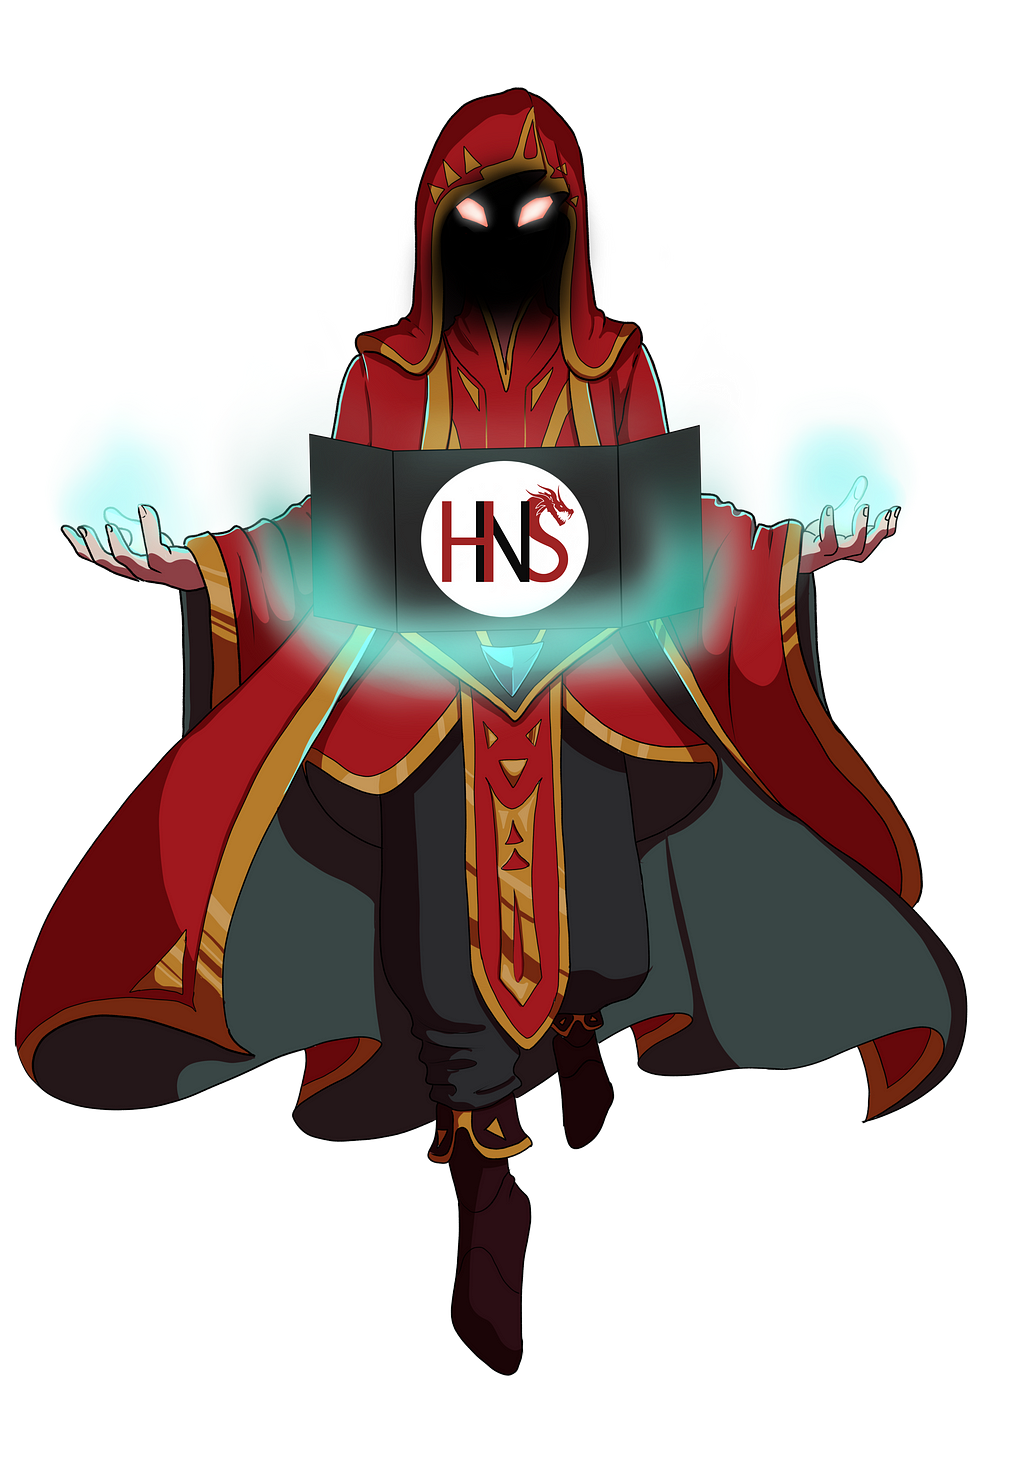 cartoon-style dungeon master in red robes